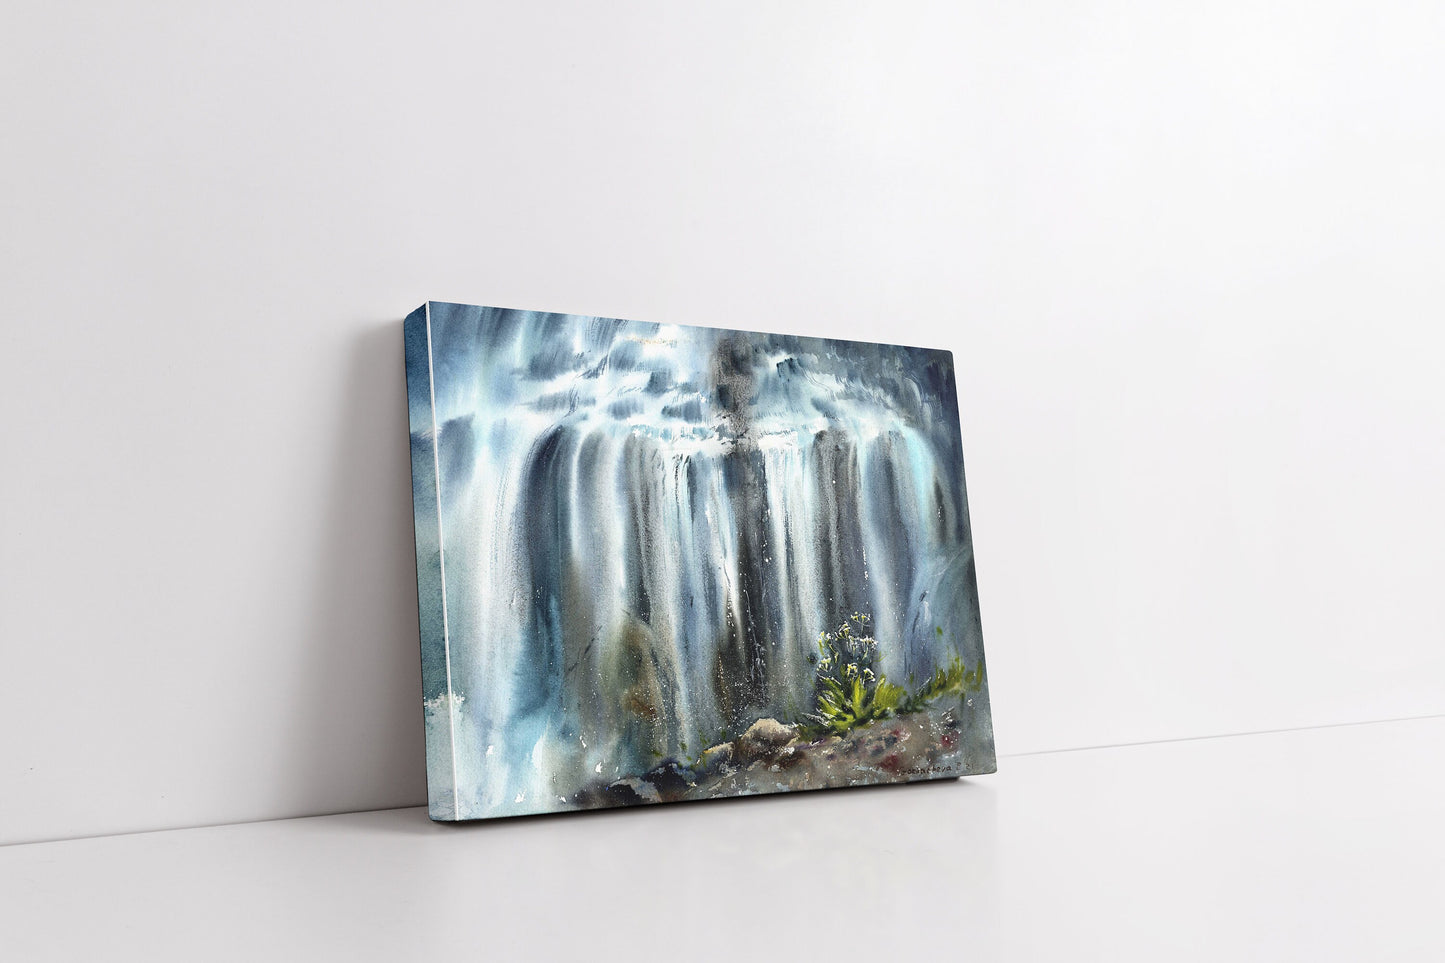 Tropic Waterfall Art Print, Beautiful Nature Landscape Canvas Wall Art Design, Decor for Home & Office Decoration